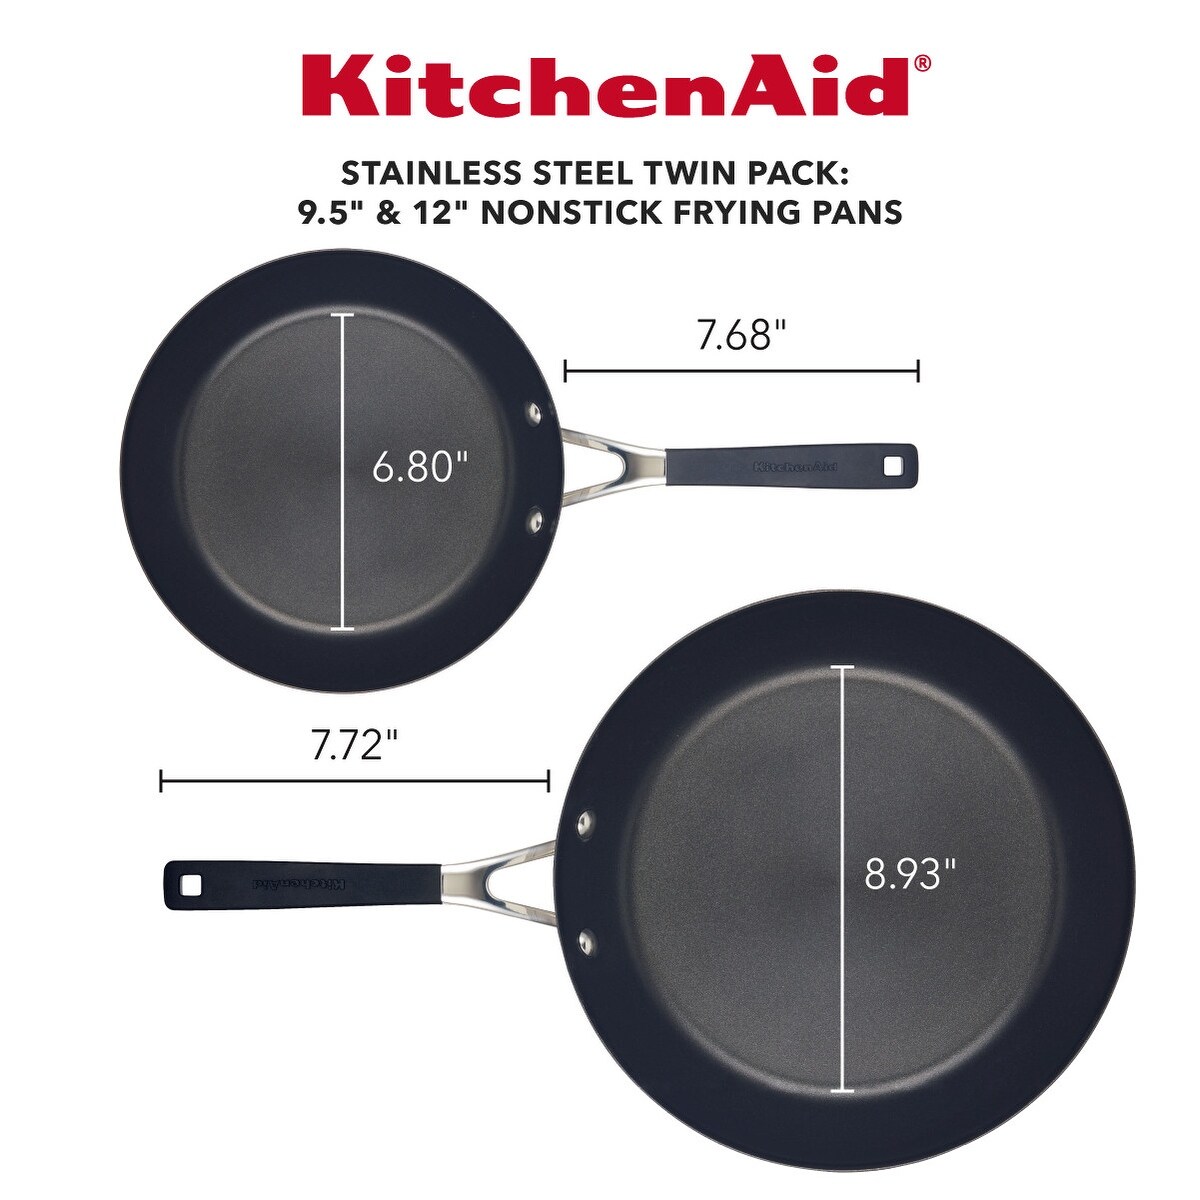 https://ak1.ostkcdn.com/images/products/is/images/direct/cdfd0ac9a0b08c447d722752b5a641981c27cf5c/KitchenAid-Stainless-Steel-Nonstick-Induction-Frying-Pan-Set%2C-2-Piece%2C-Brushed-Stainless-Steel.jpg